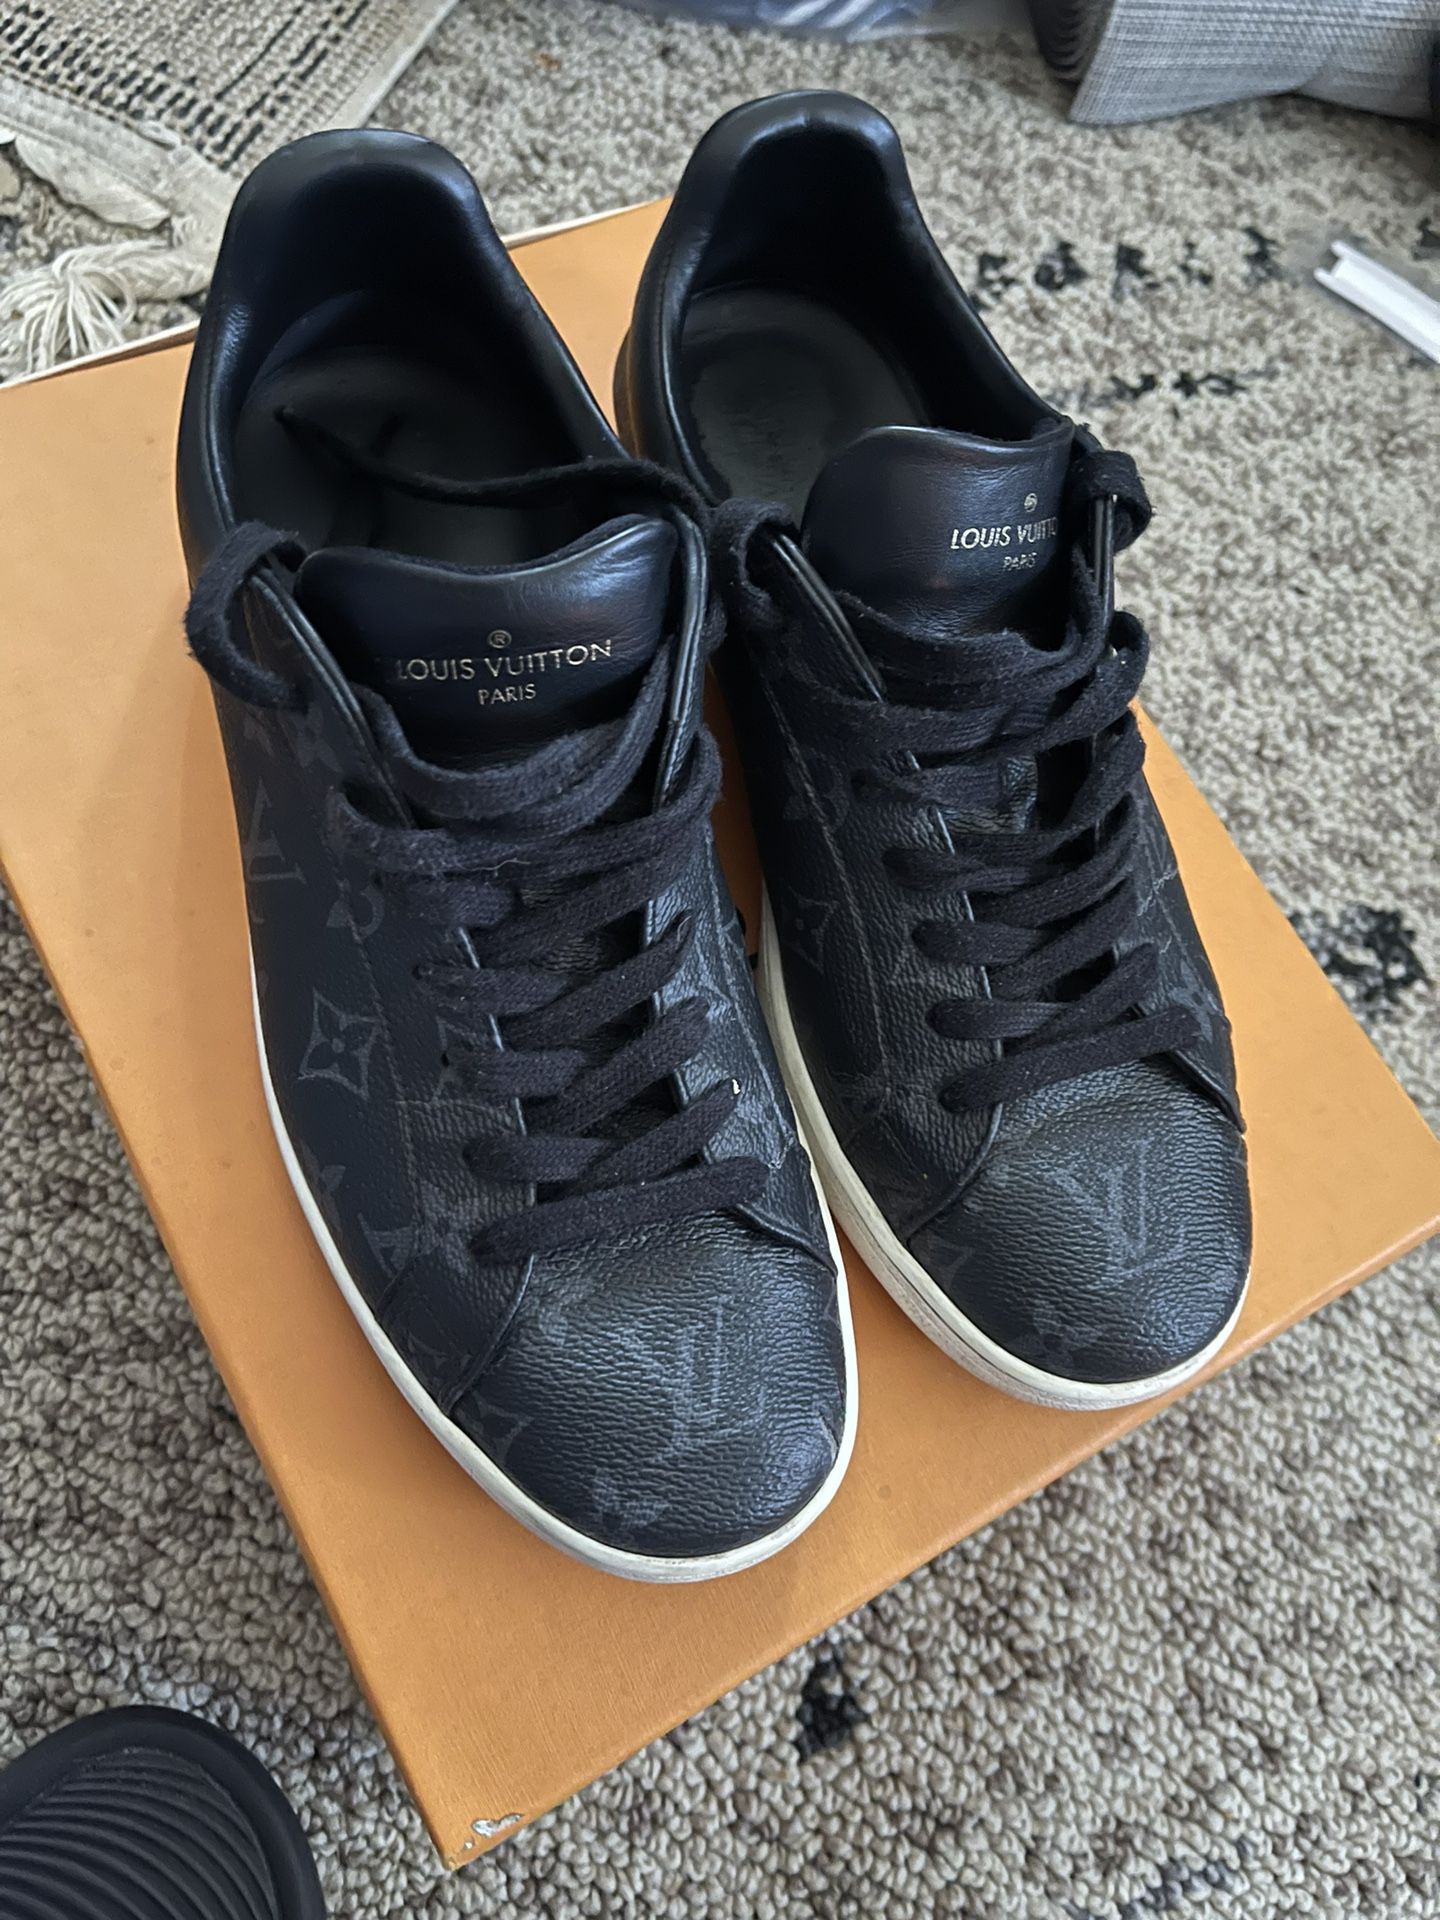 Get the New LOUIS VUITTON MONOGRAM ECLIPSE LUXEMBOURG SNEAKER